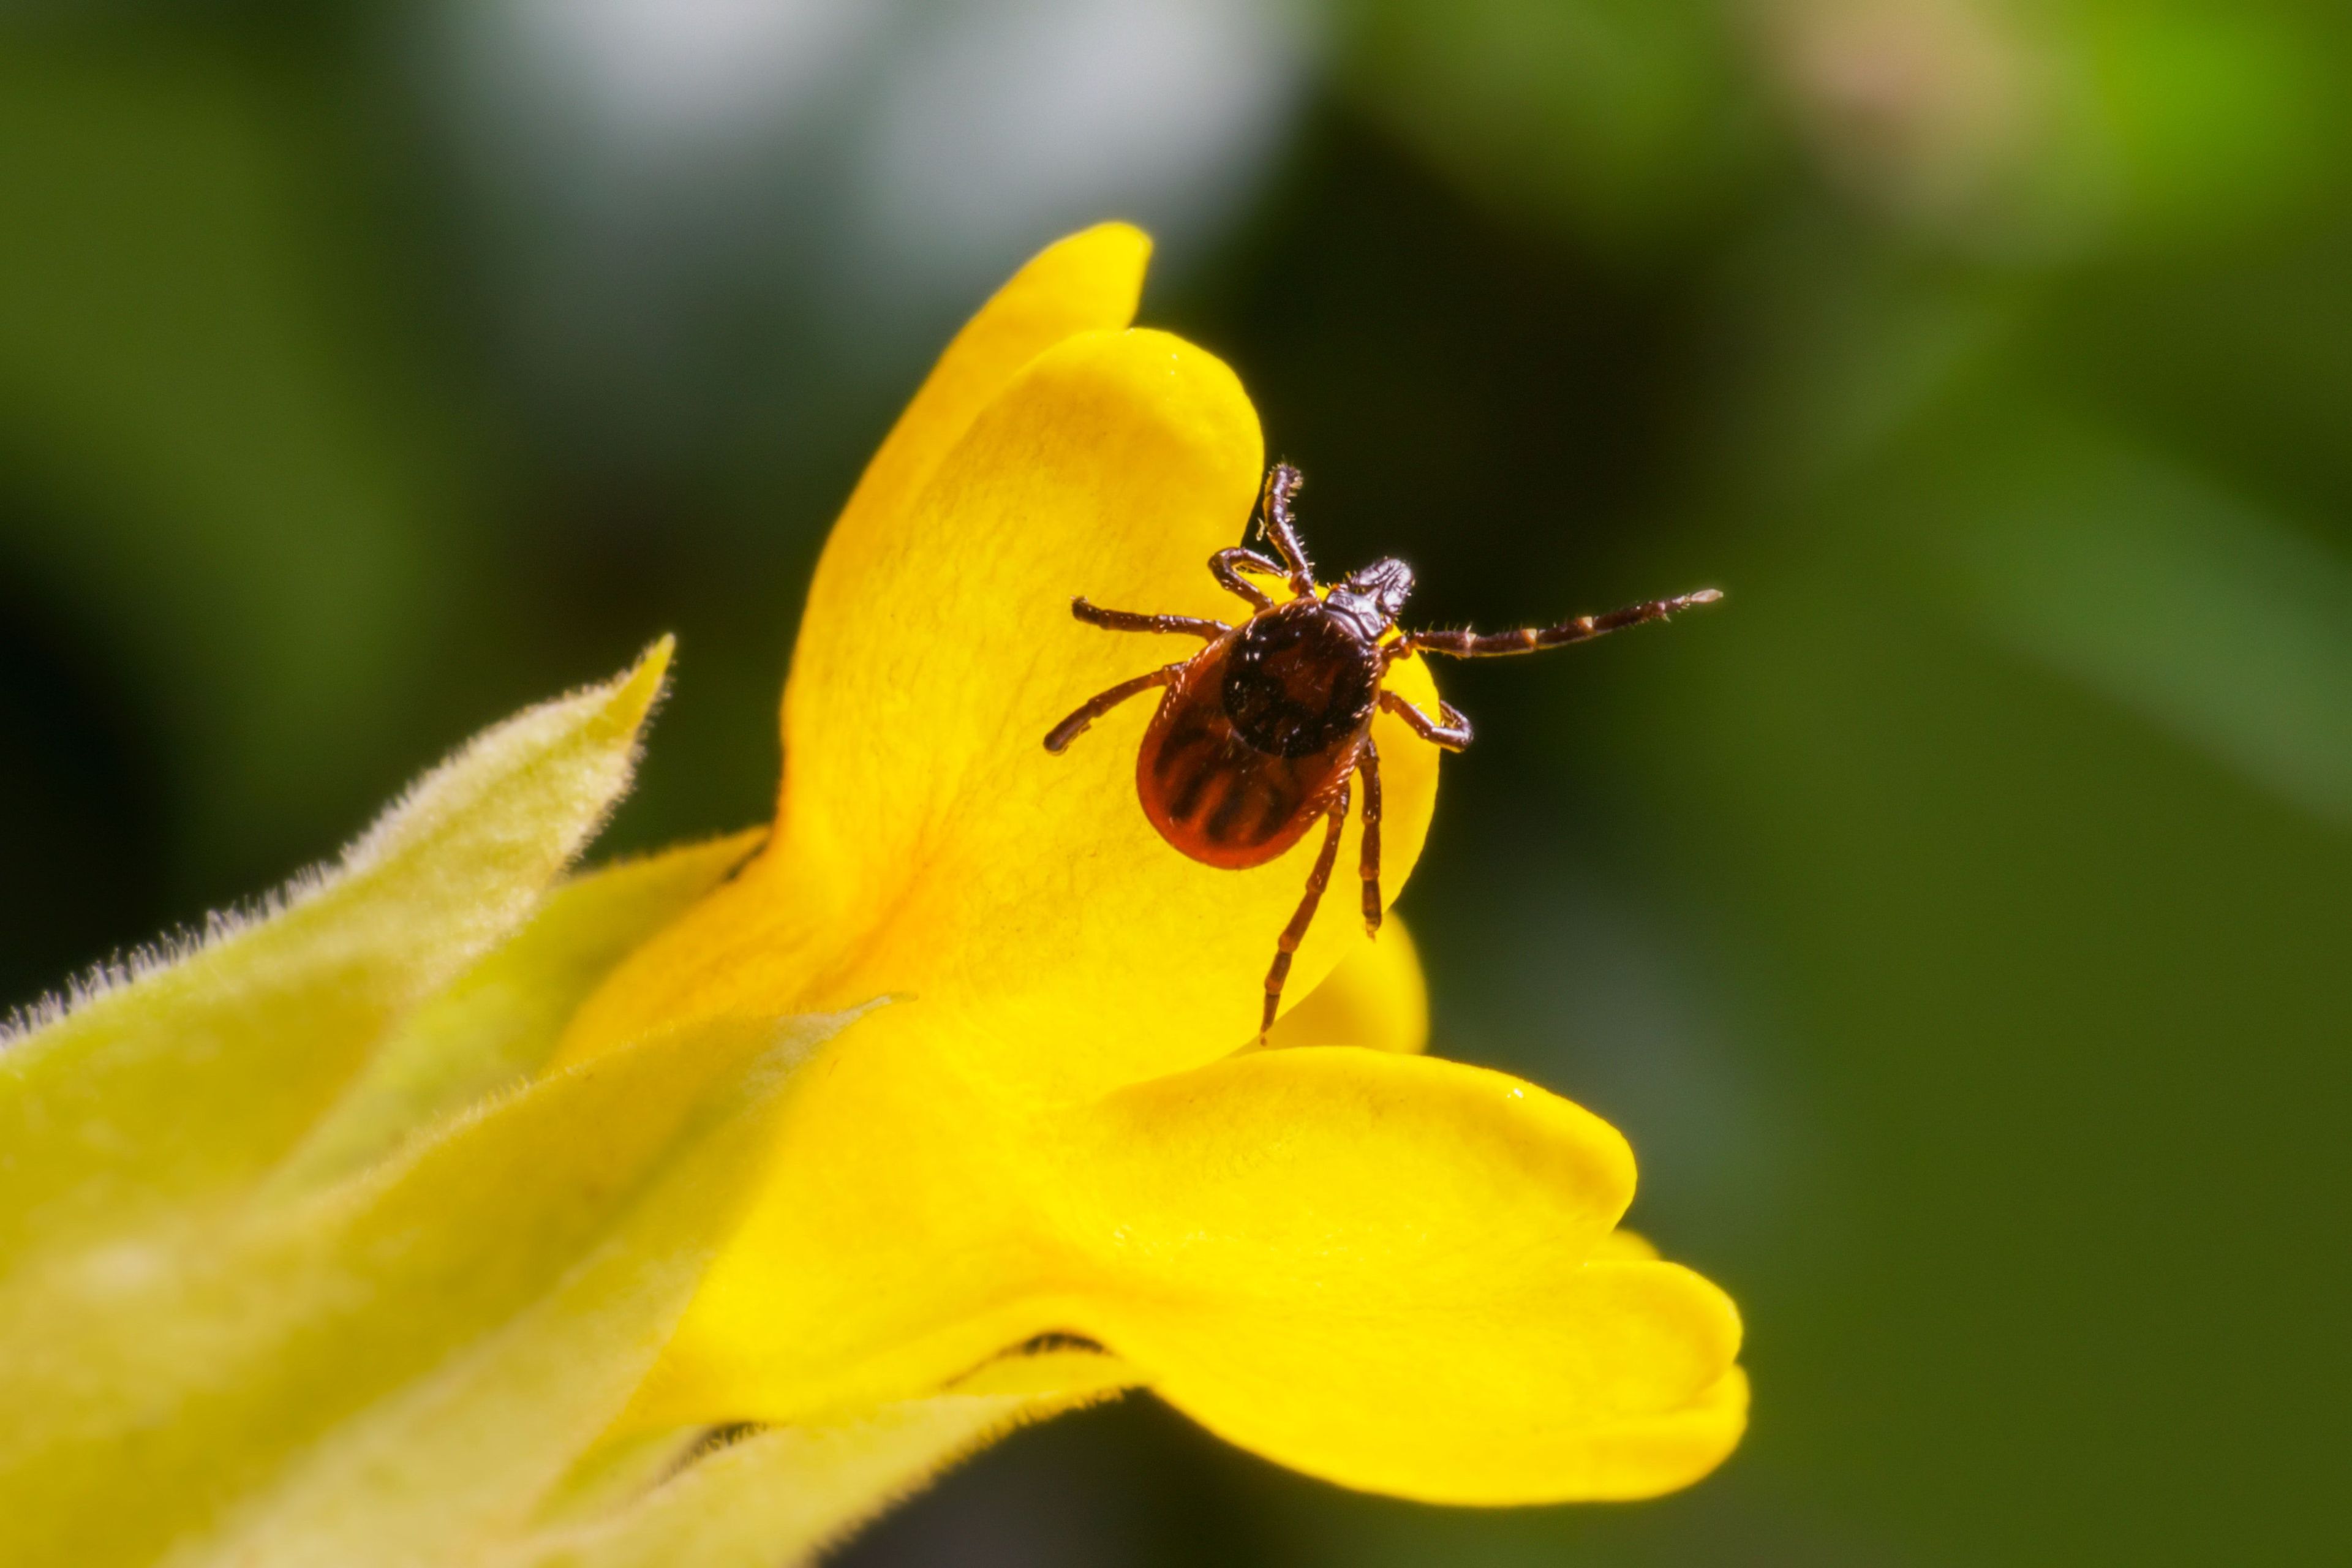 A tick sitting on a yellow flower 